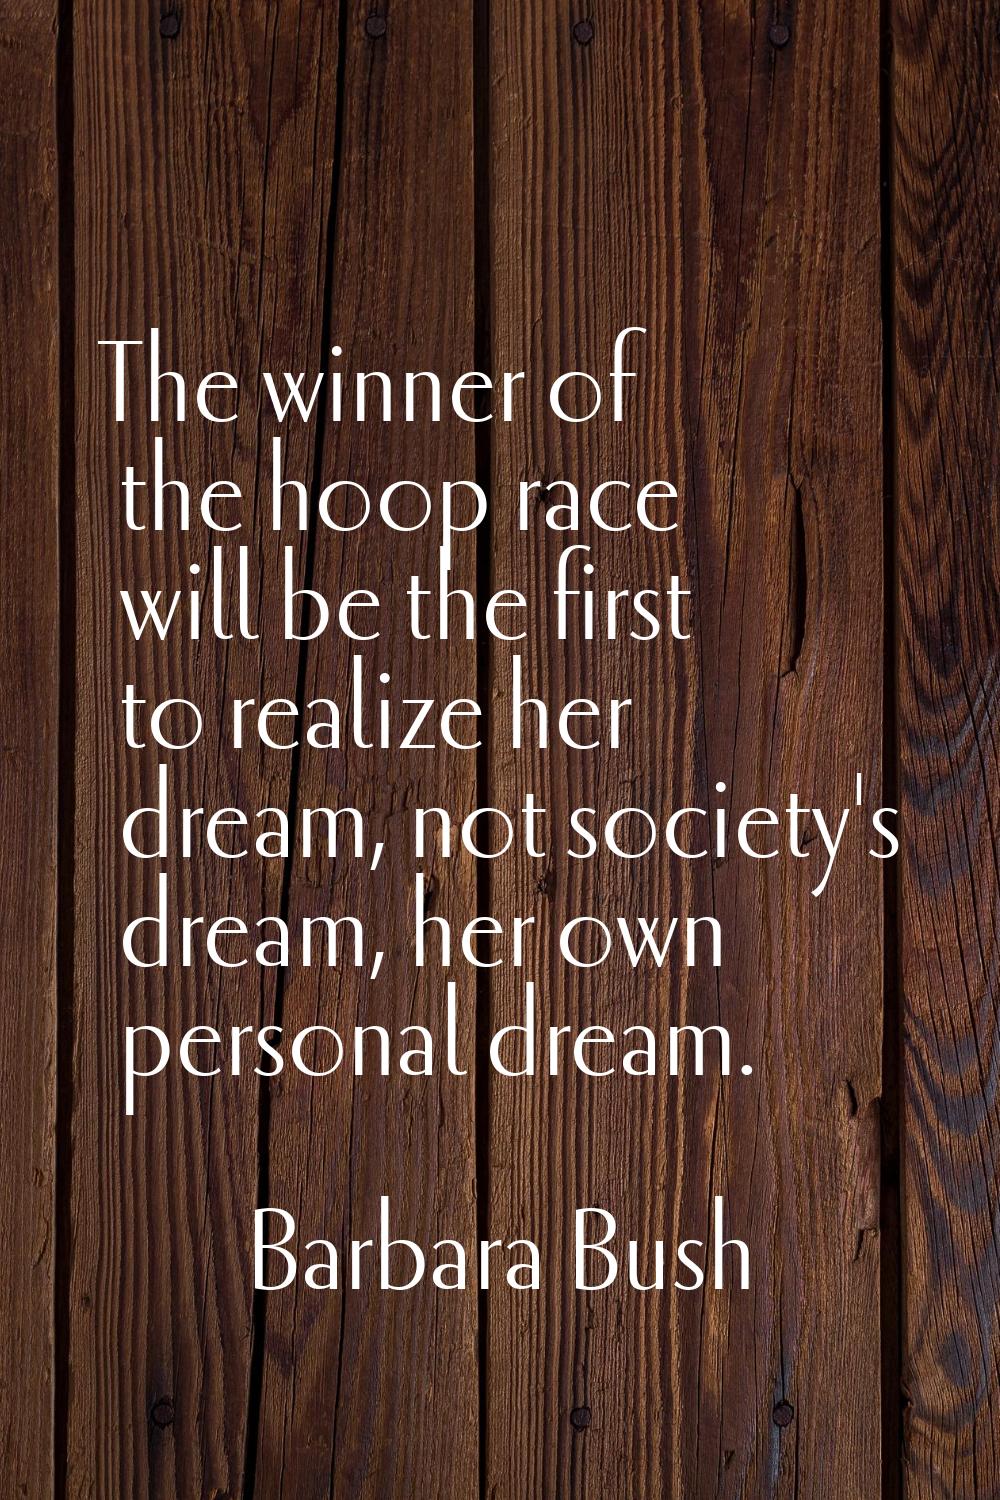 The winner of the hoop race will be the first to realize her dream, not society's dream, her own pe